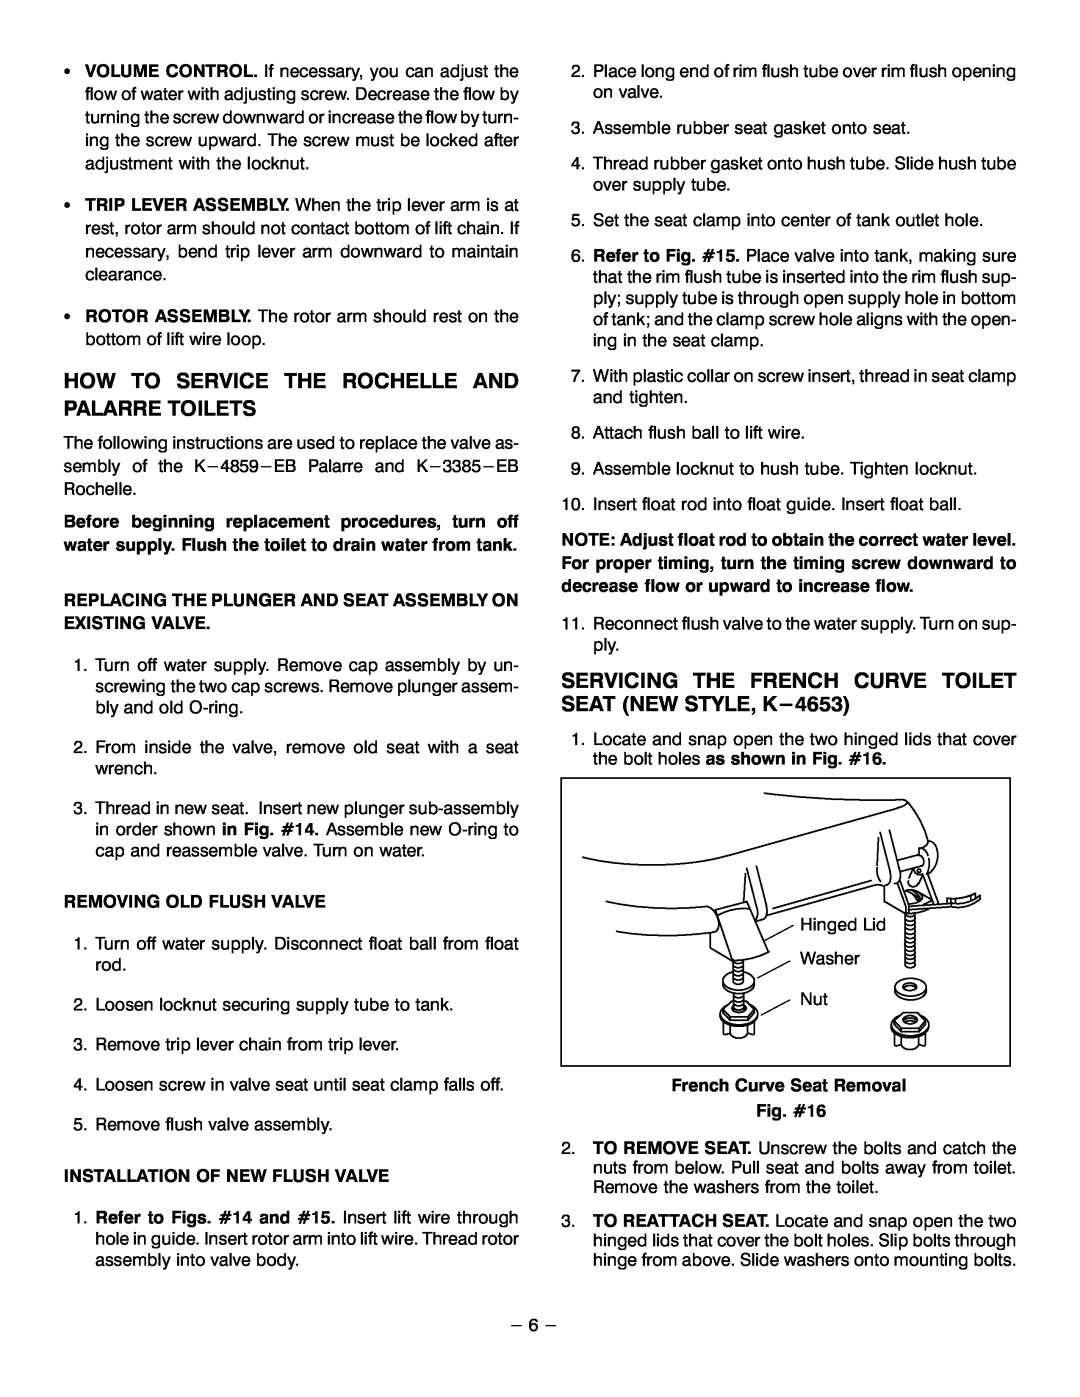 Kohler K-3385-EB, K-3378-EB, K-3402-EB manual How To Service The Rochelle And Palarre Toilets 